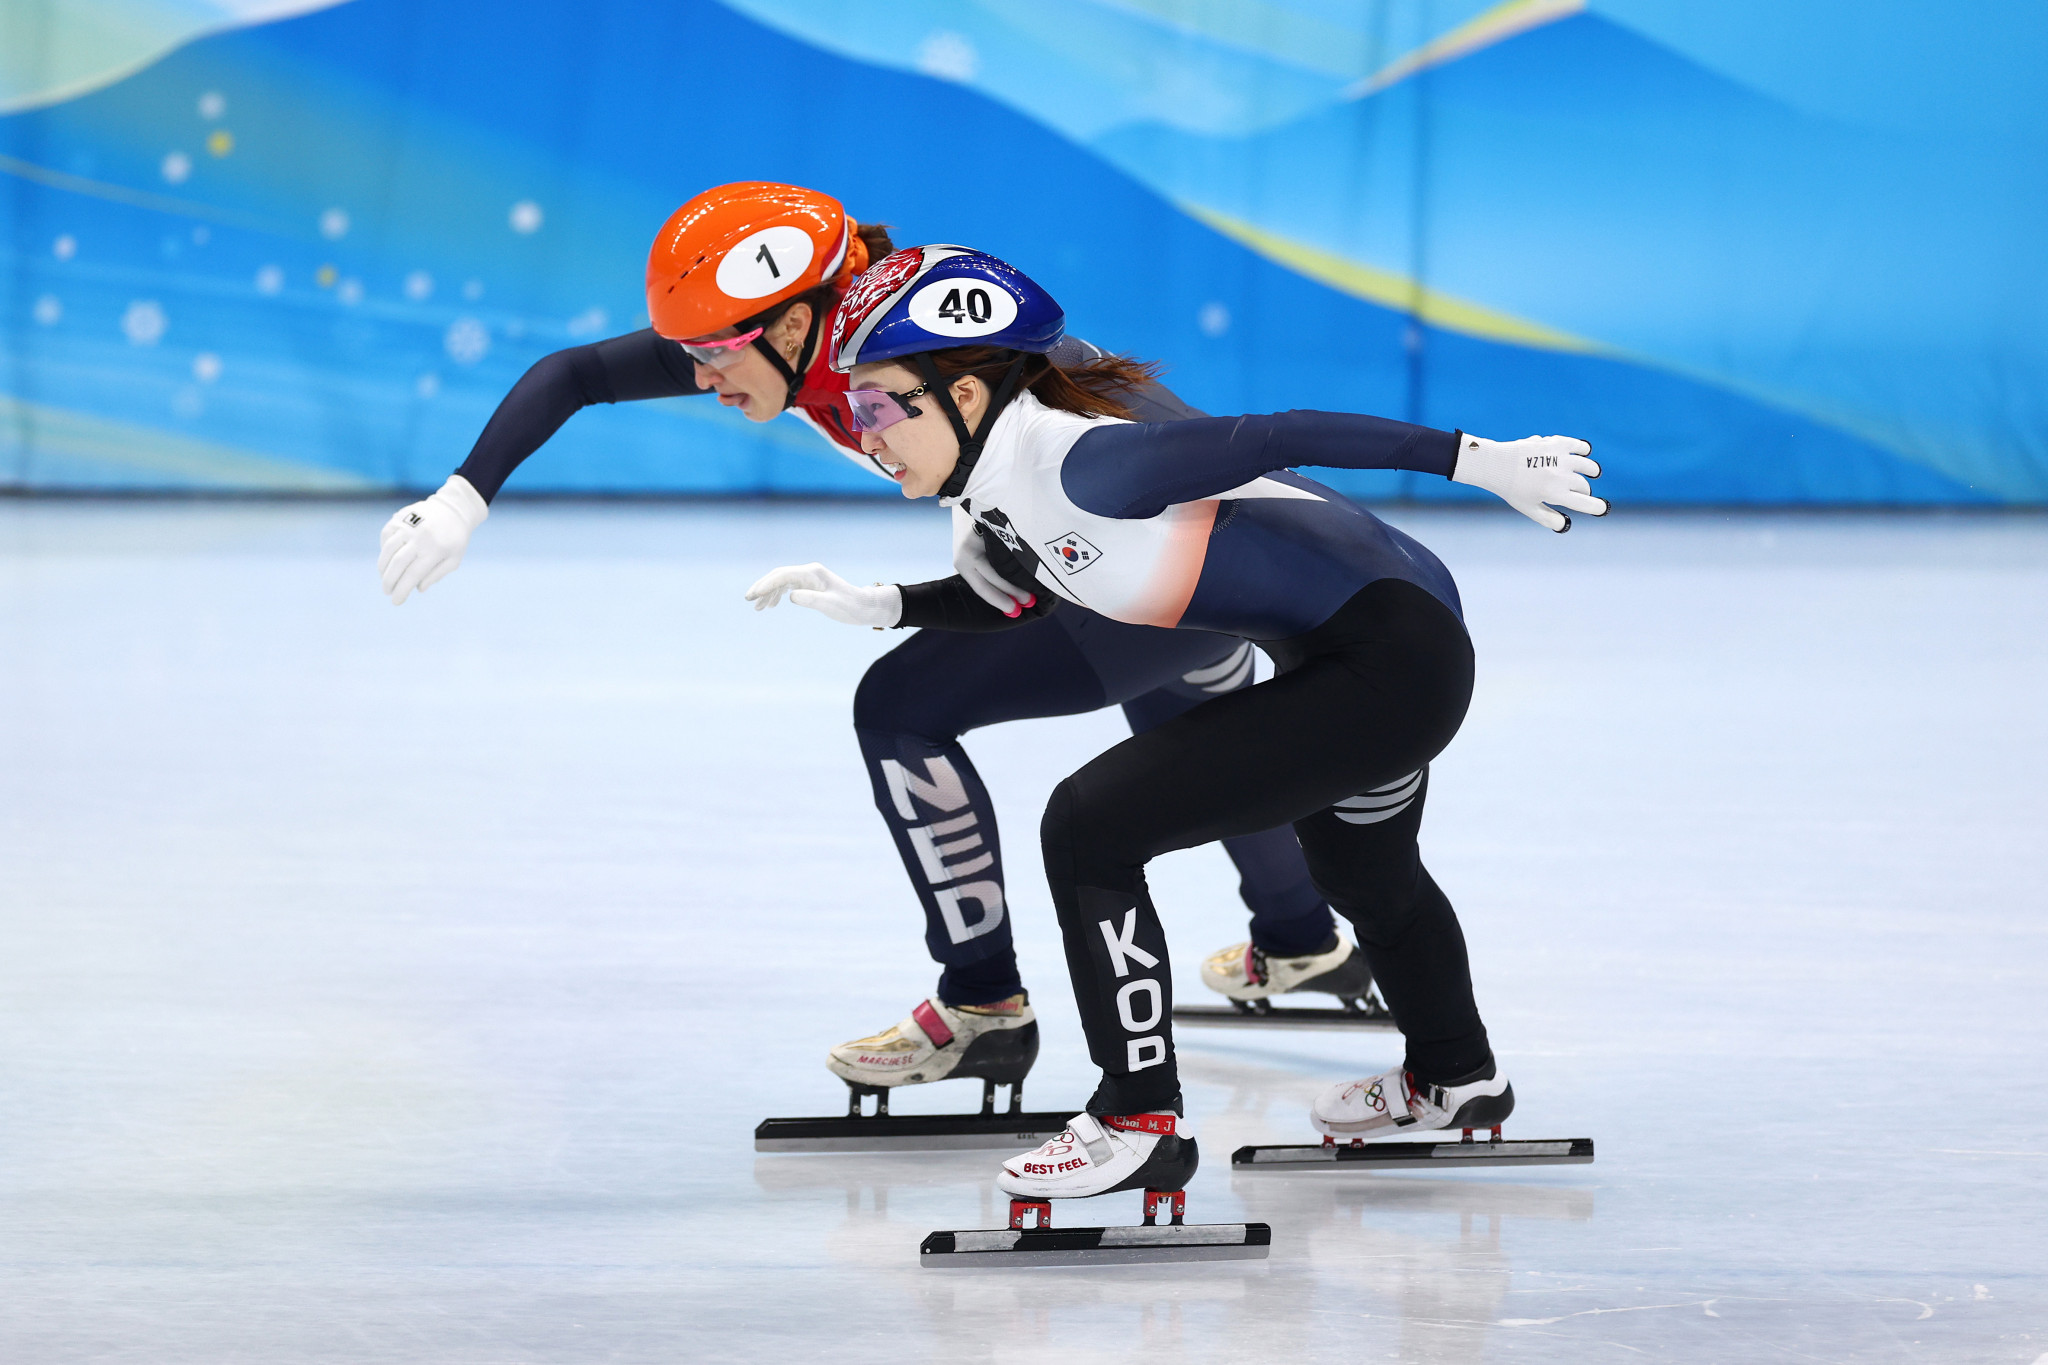 Suzanne Schulting of the Netherlands, left, edged out Choi Min-Jeong to claim the women's 1,000 metres short track speed skating title ©Getty Images